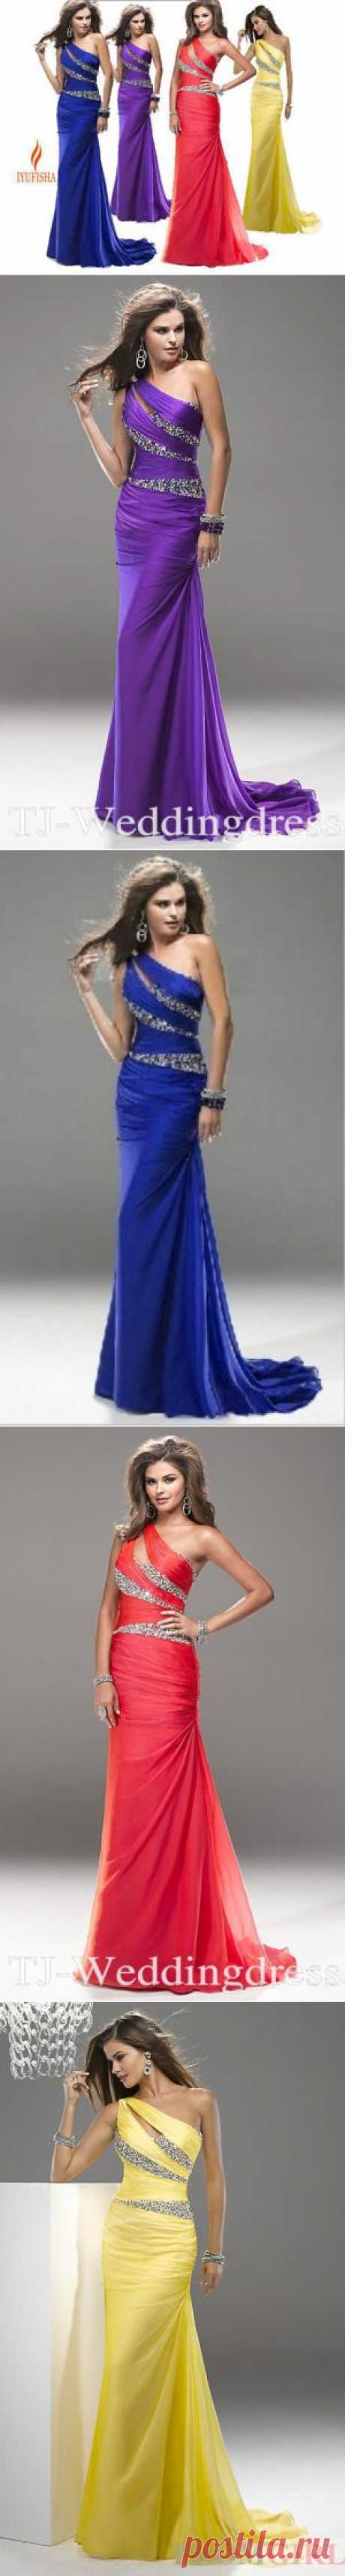 Long Chiffon Evening Gown Bridesmaid Dresses Prom Dress Formal Party Ball Gowns | eBay 672,29